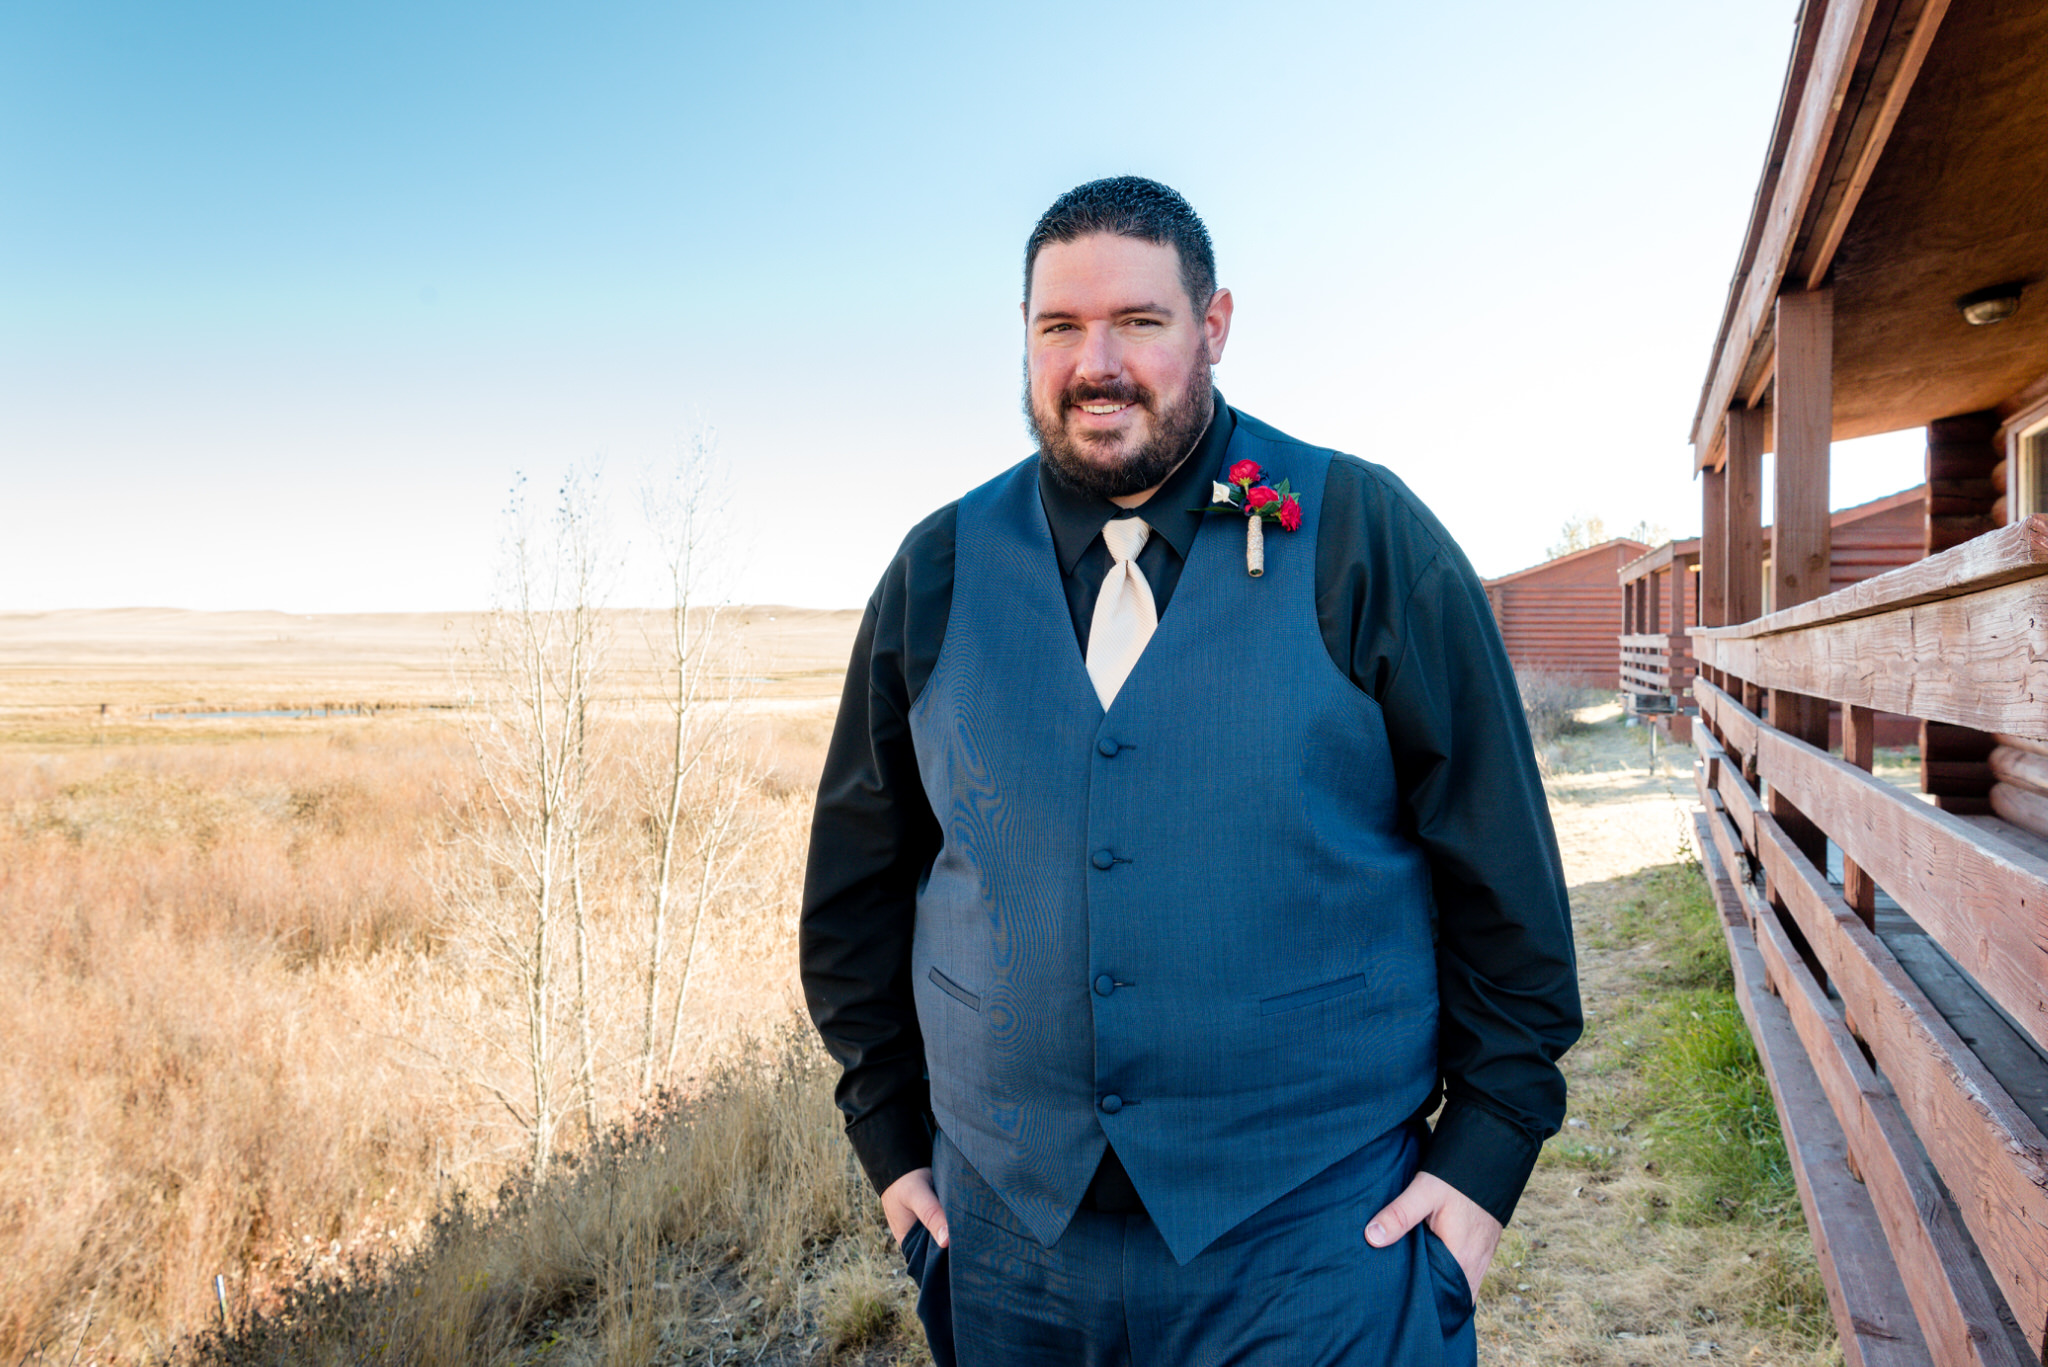 Groom anxiously waiting to see his bride for their first look. Briana and Kevin's Terry Bison Ranch Wedding by Wyoming Wedding Photographer Jennifer Garza, Wyoming Wedding, Wyoming Wedding Photographer, Wyoming Engagement Photographer, Wyoming Bride, Couples Goals, Wyoming Wedding, Wedding Photographer, Wyoming Photographer, Wyoming Wedding Photography, Wedding Inspiration, Destination Wedding Photographer, Fall Wedding, Ranch Wedding, Rustic Wedding Inspiration, Wedding Dress Inspo